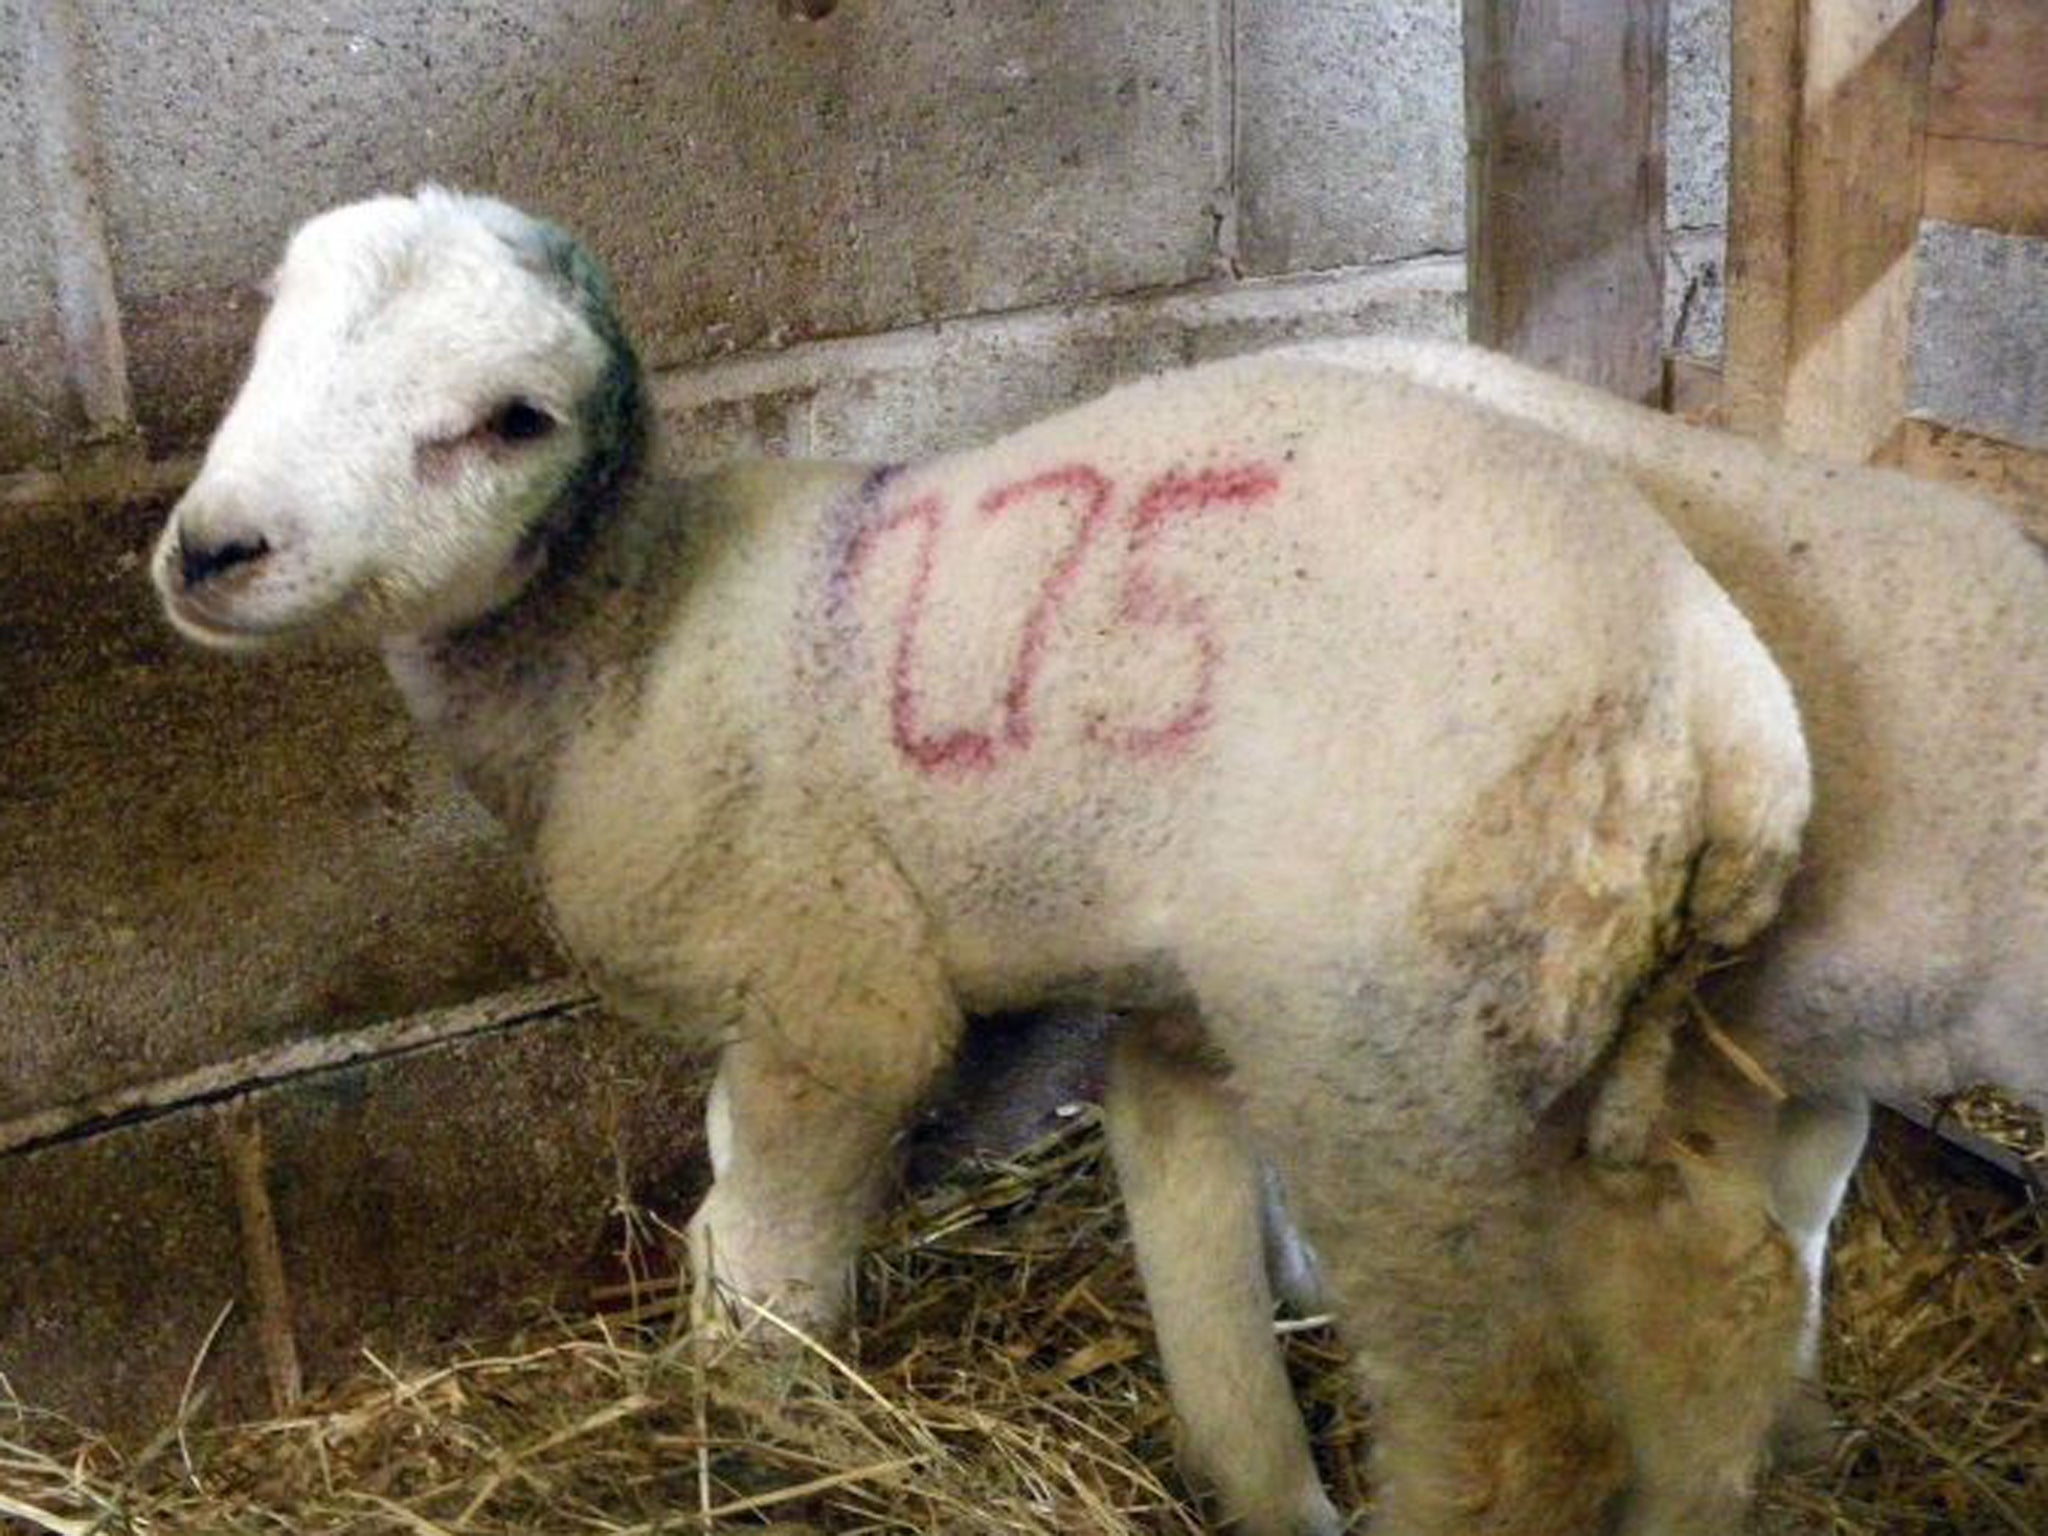 A three-week-old lamb which has had its ears cut off in a 'horrendous act of animal cruelty'